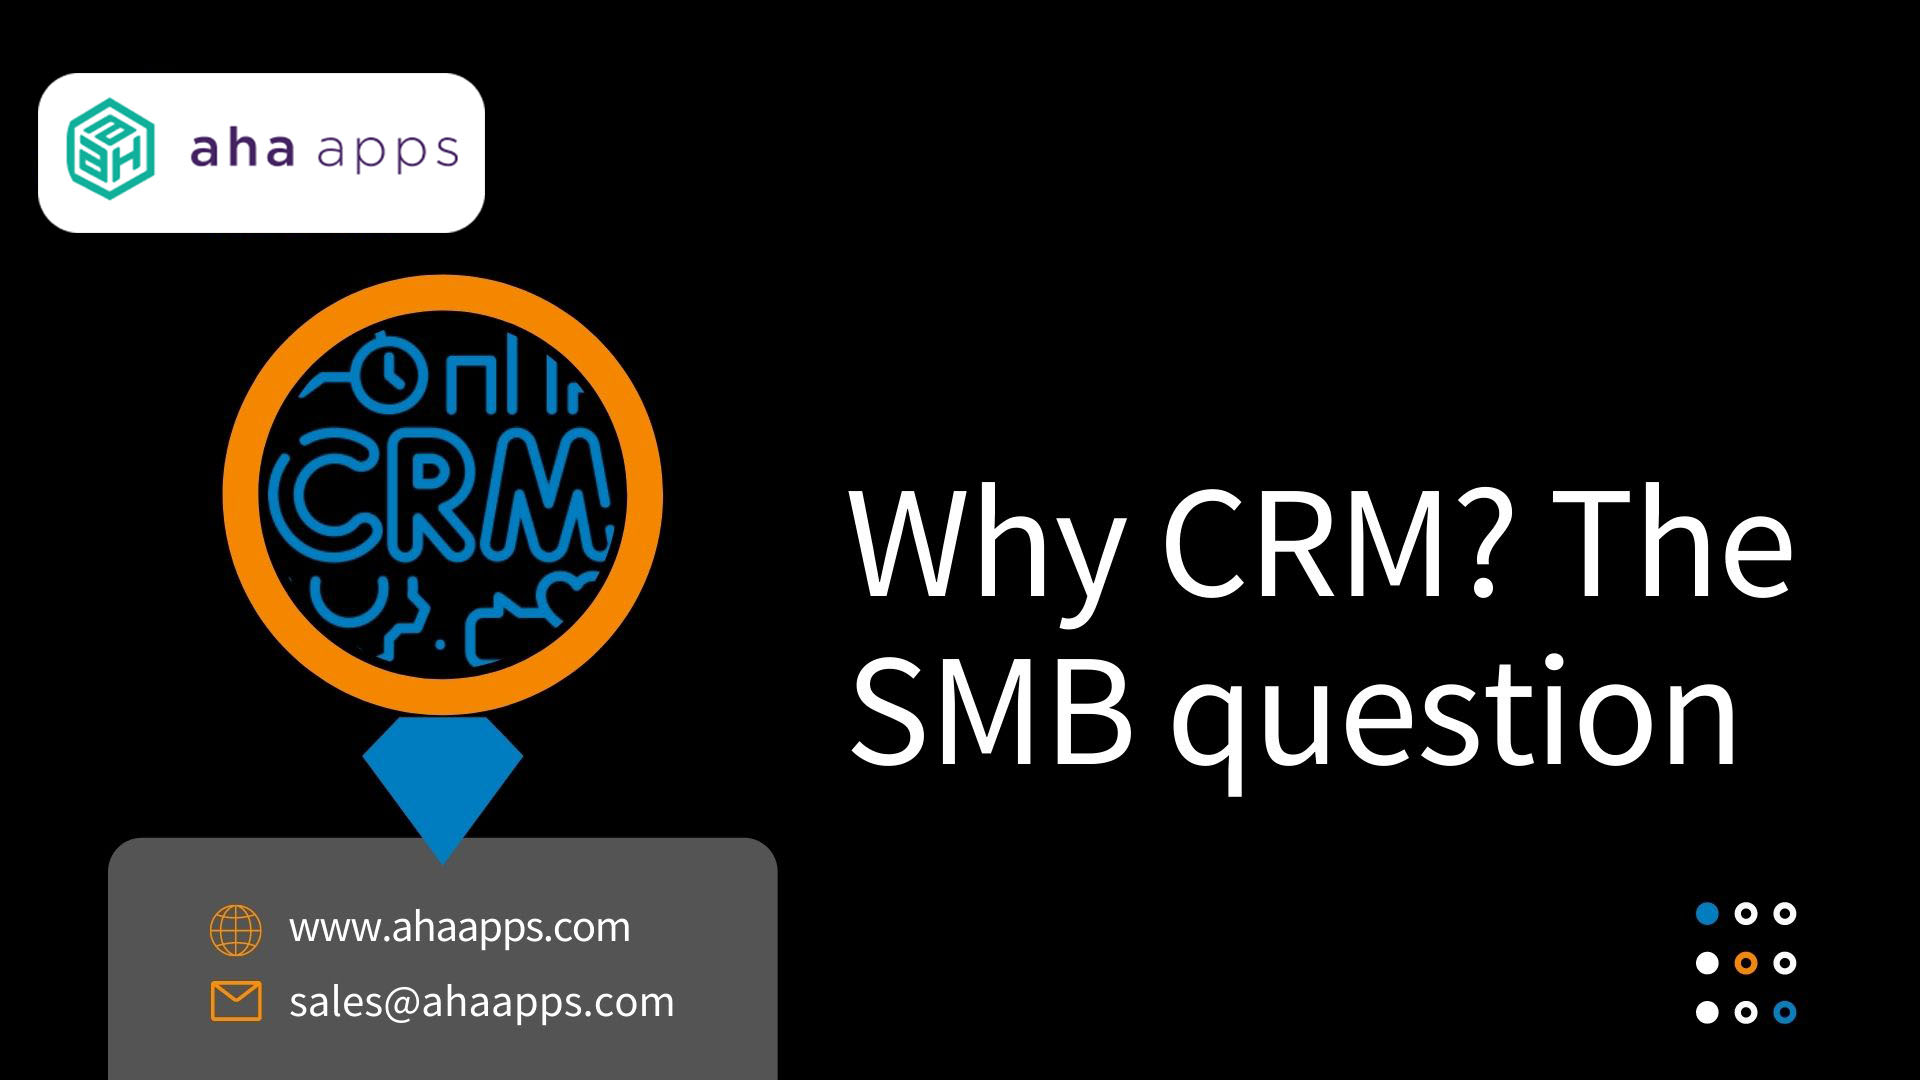 Why CRM? The SMB question - AhaApps